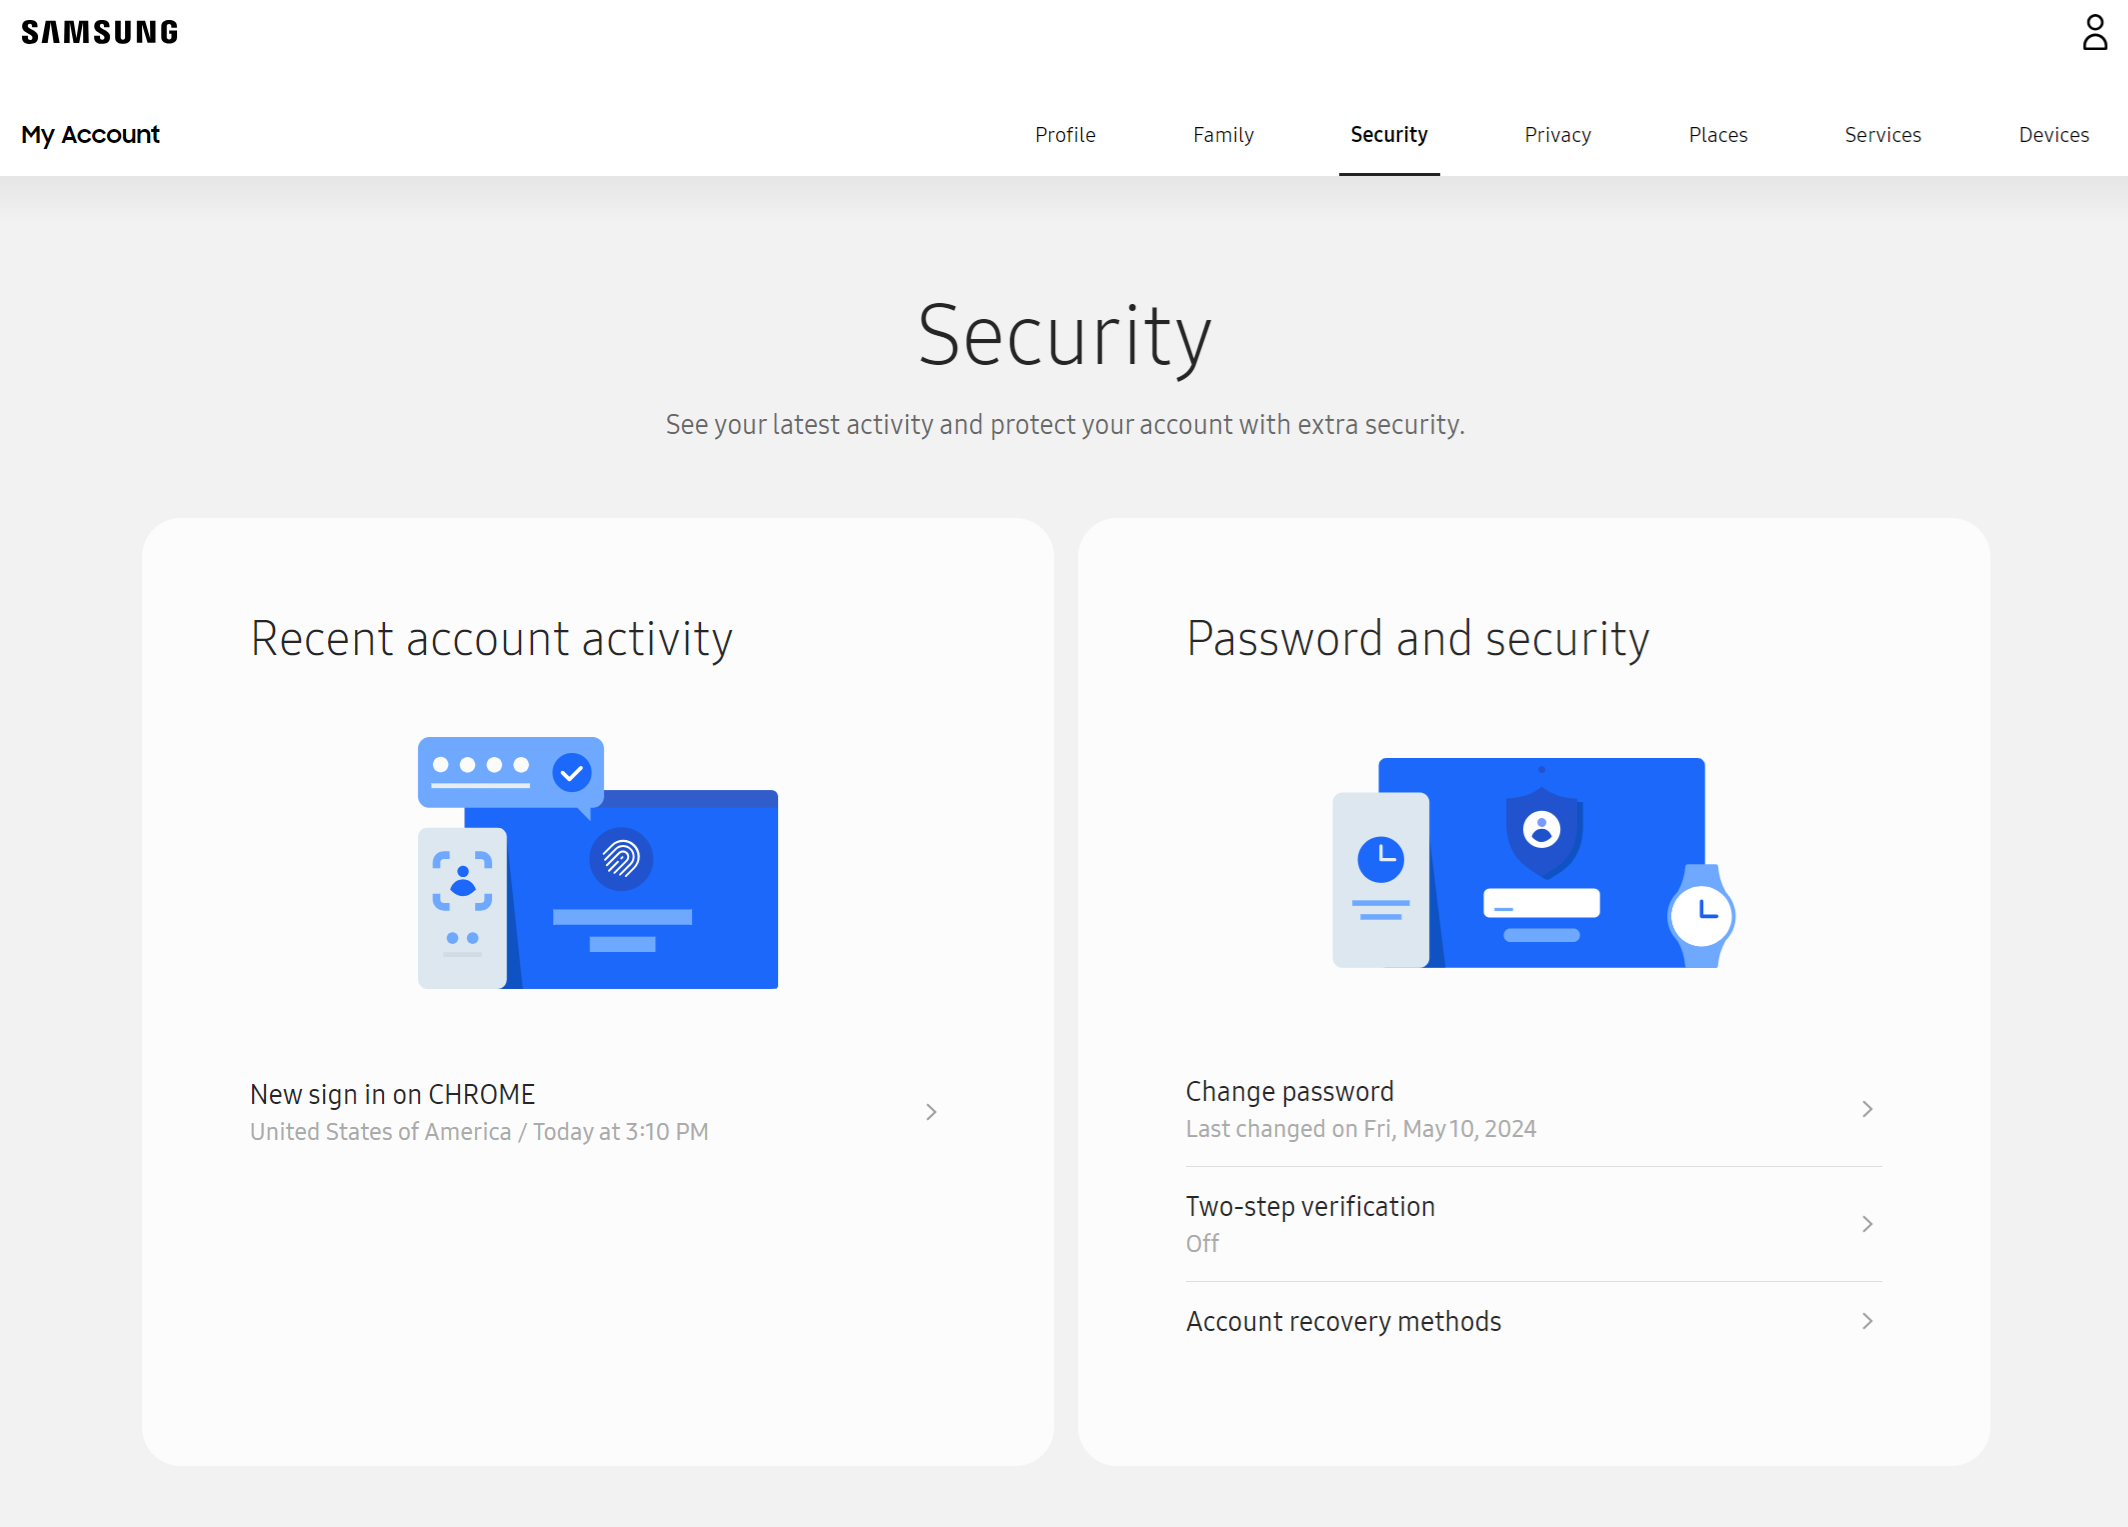 My account Security page